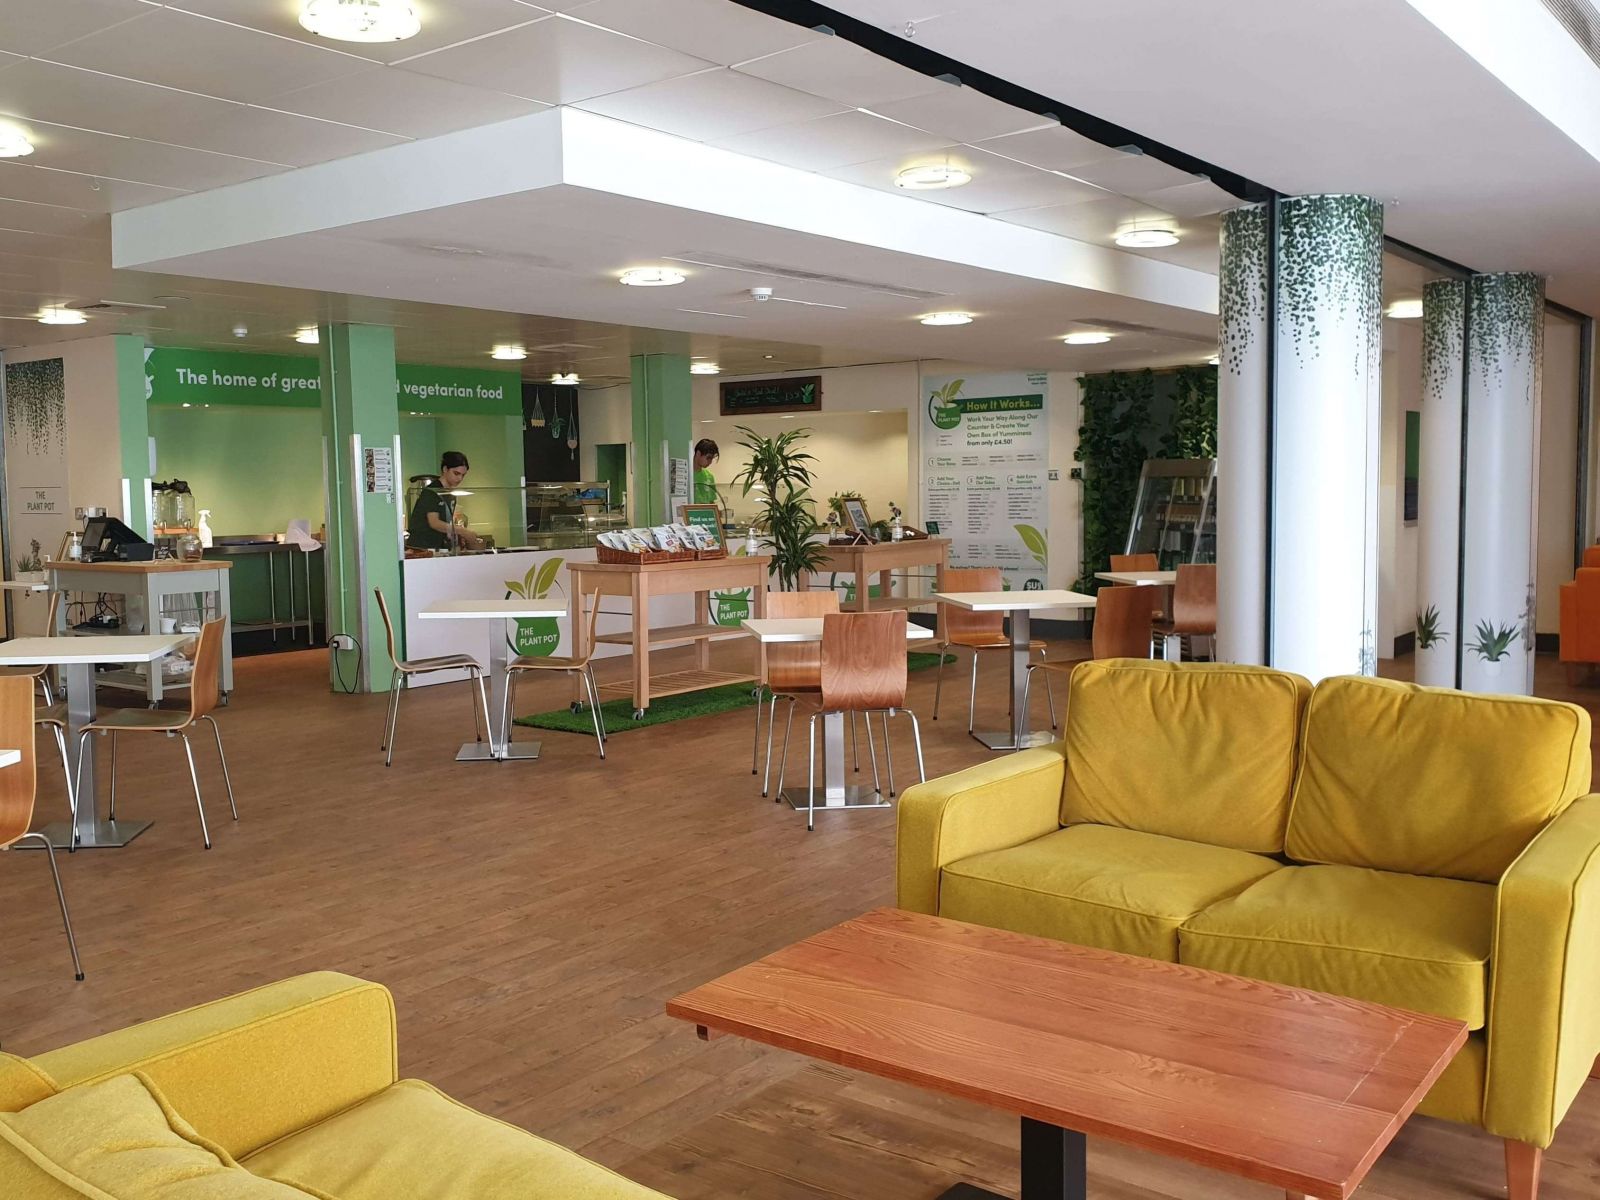 The Plant Pot counter, green sofas and seating in the cafe area